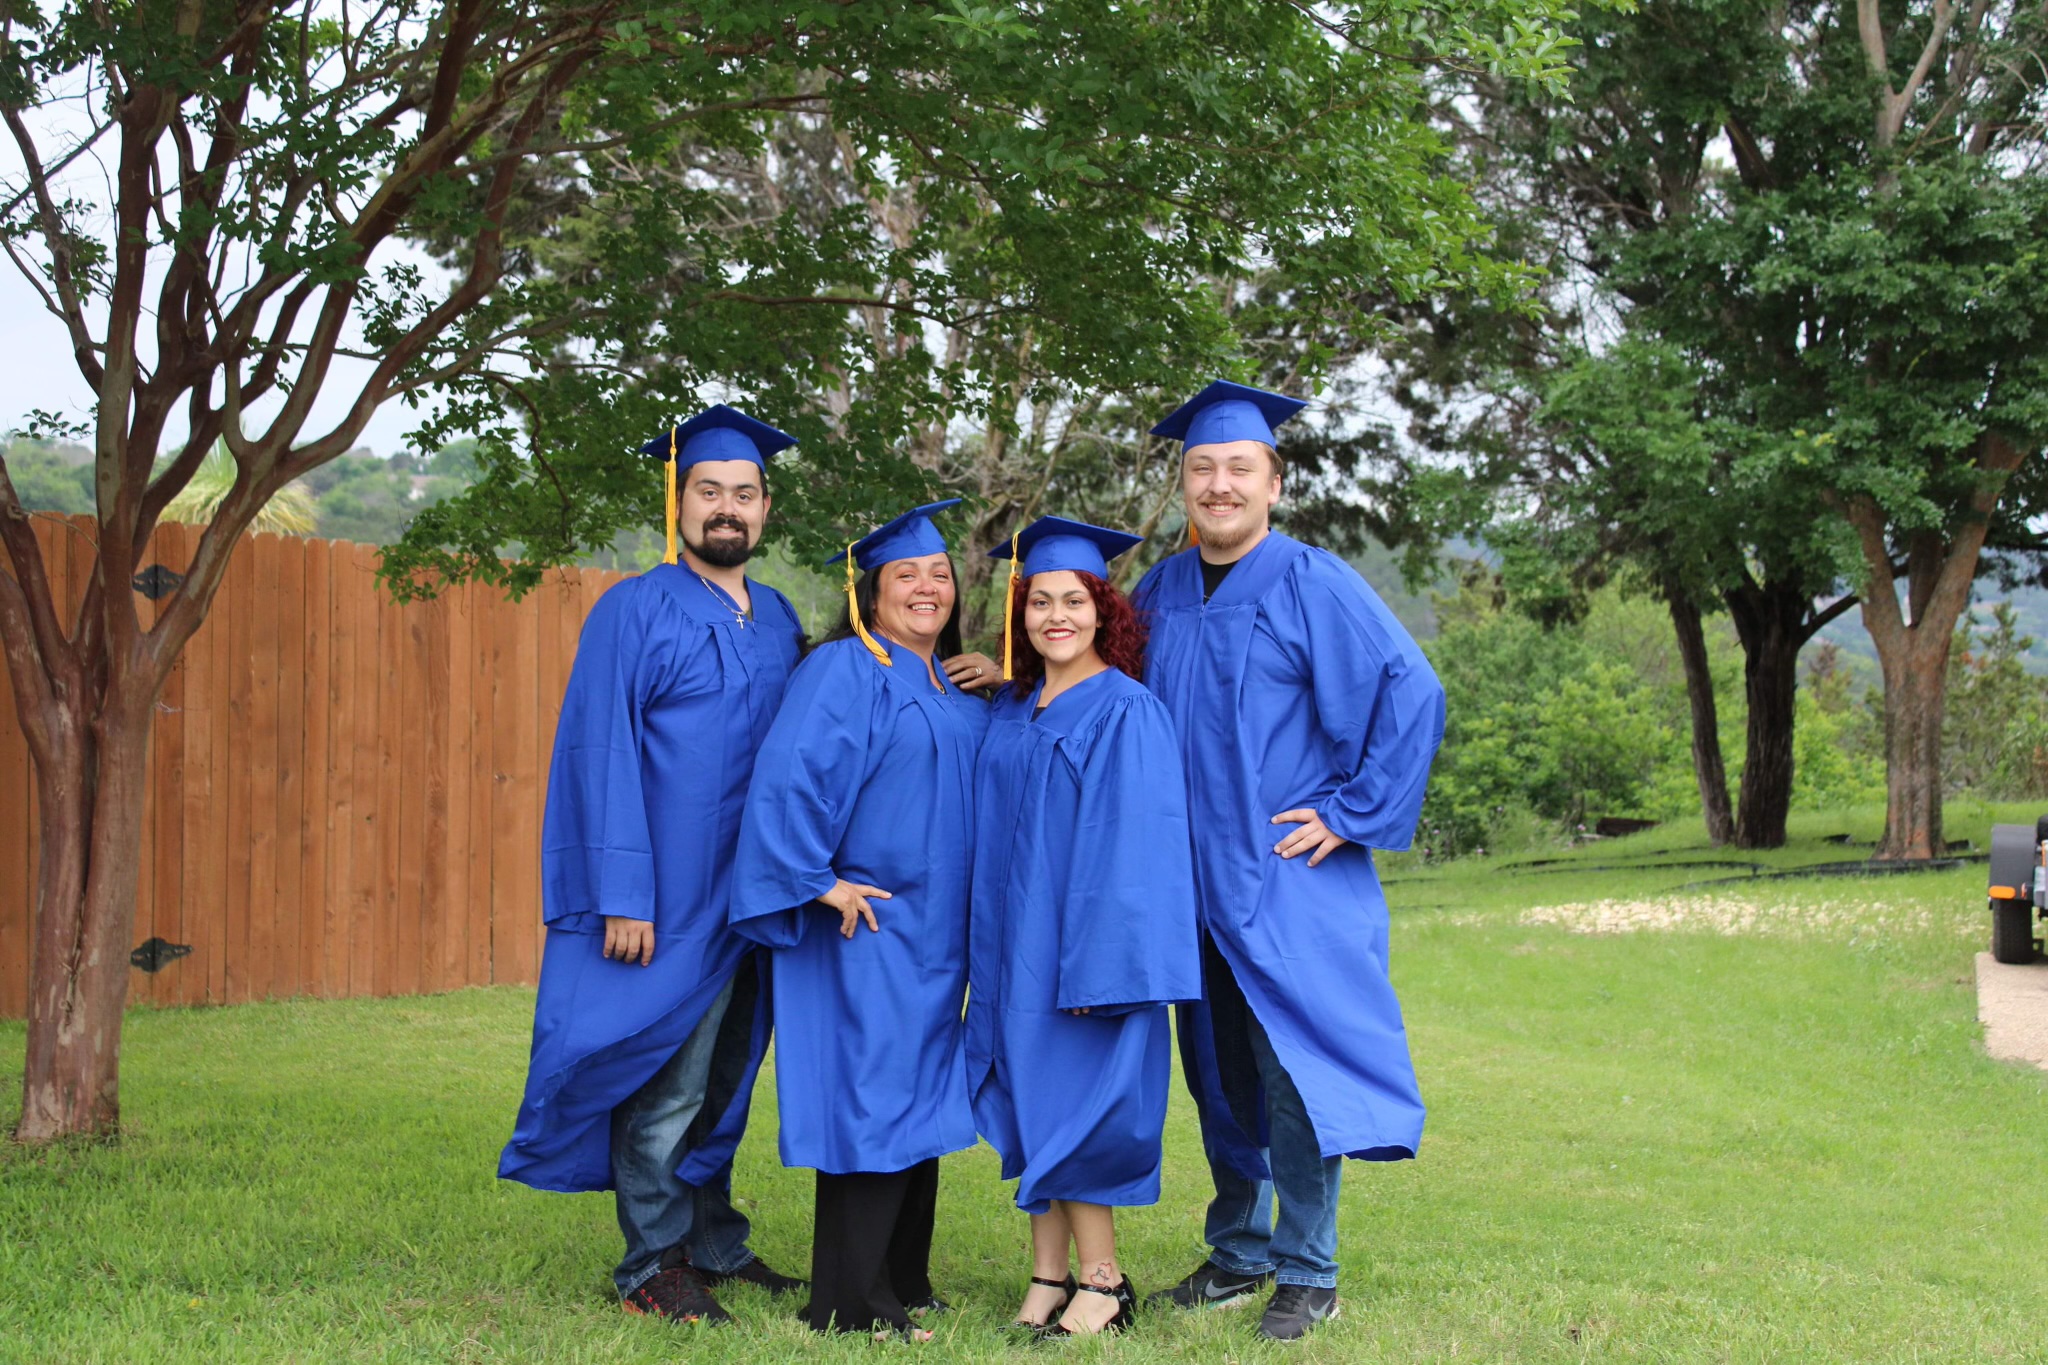 Family in graduation gowns